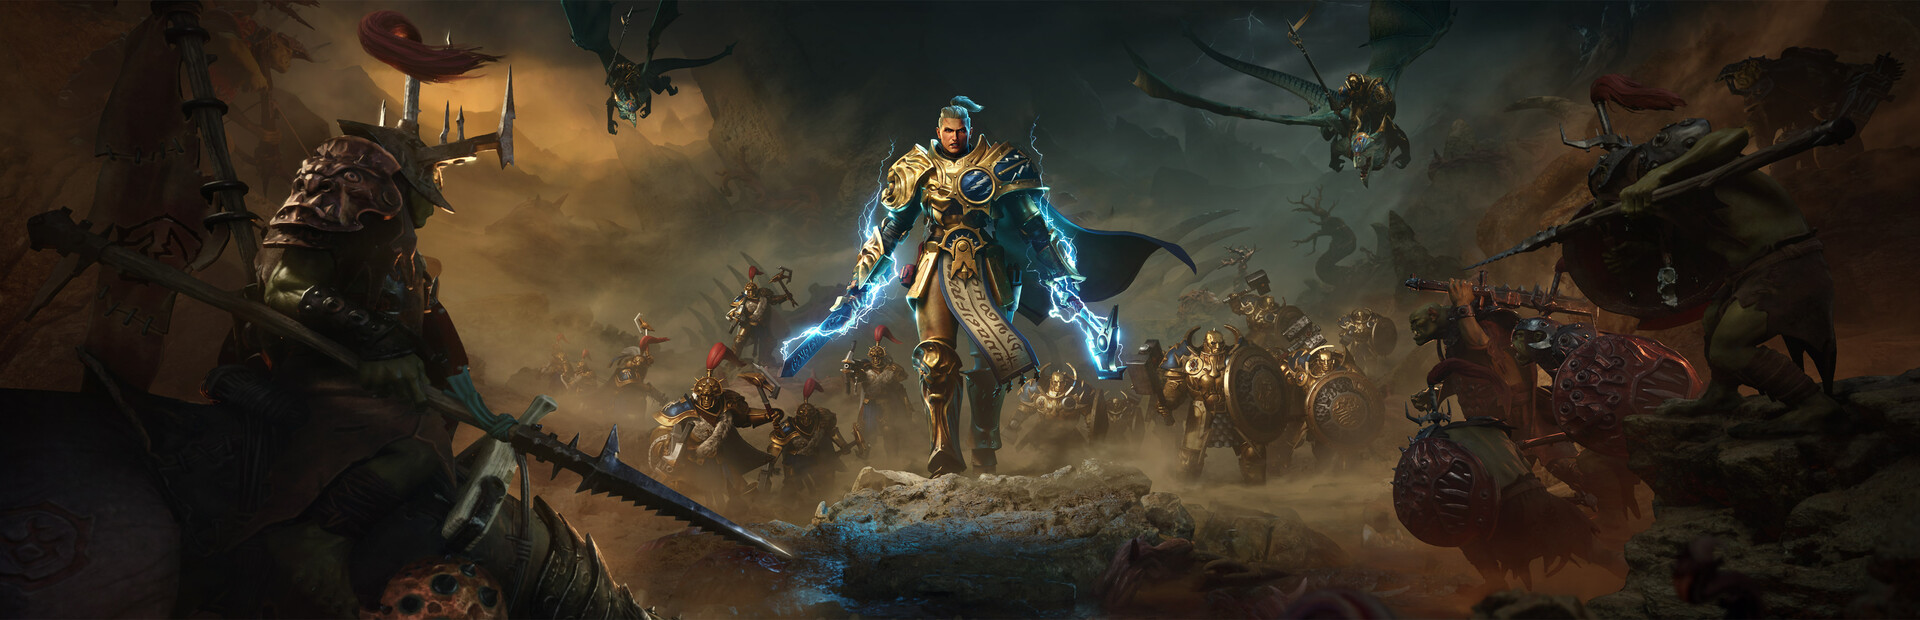 Warhammer Age of Sigmar: Realms of Ruin cover image